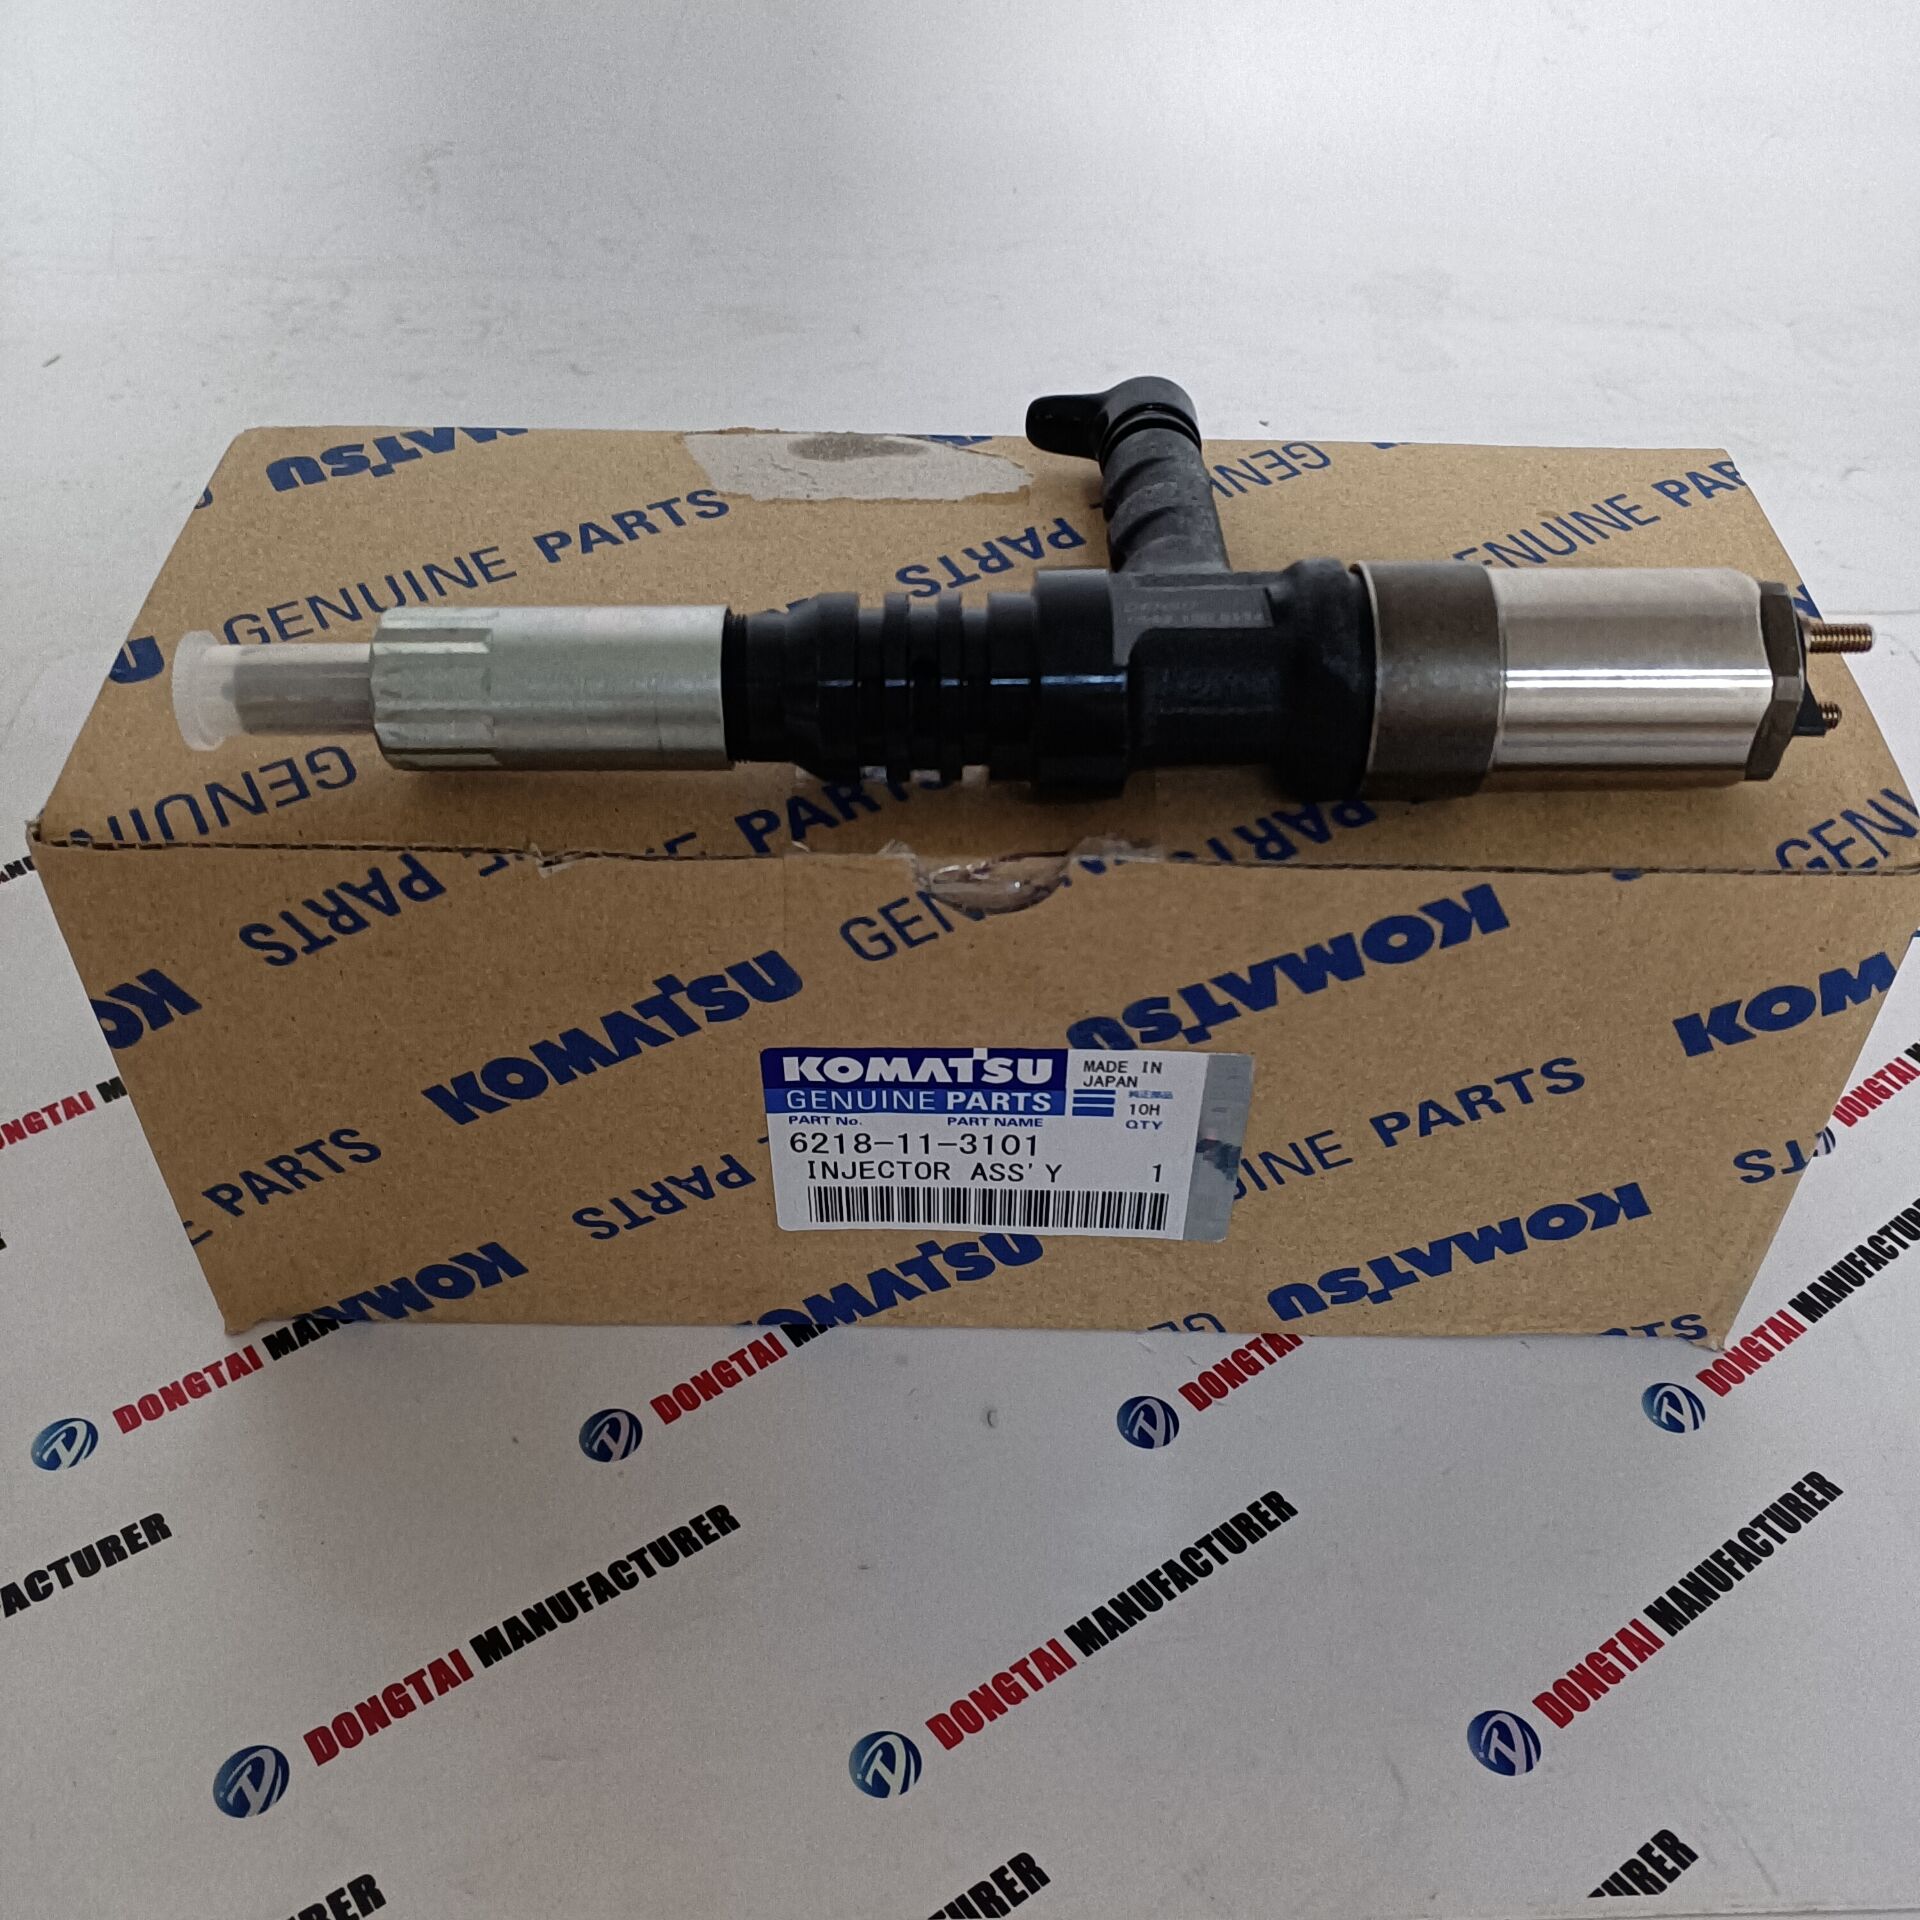 Massive Selection for Bosch Cp1 Cp3 Pump Relief Valve F 00n 200 798 - Denso Injector 095000-0562 = Komatsu Injector 6218-11-3101 – Dongtai